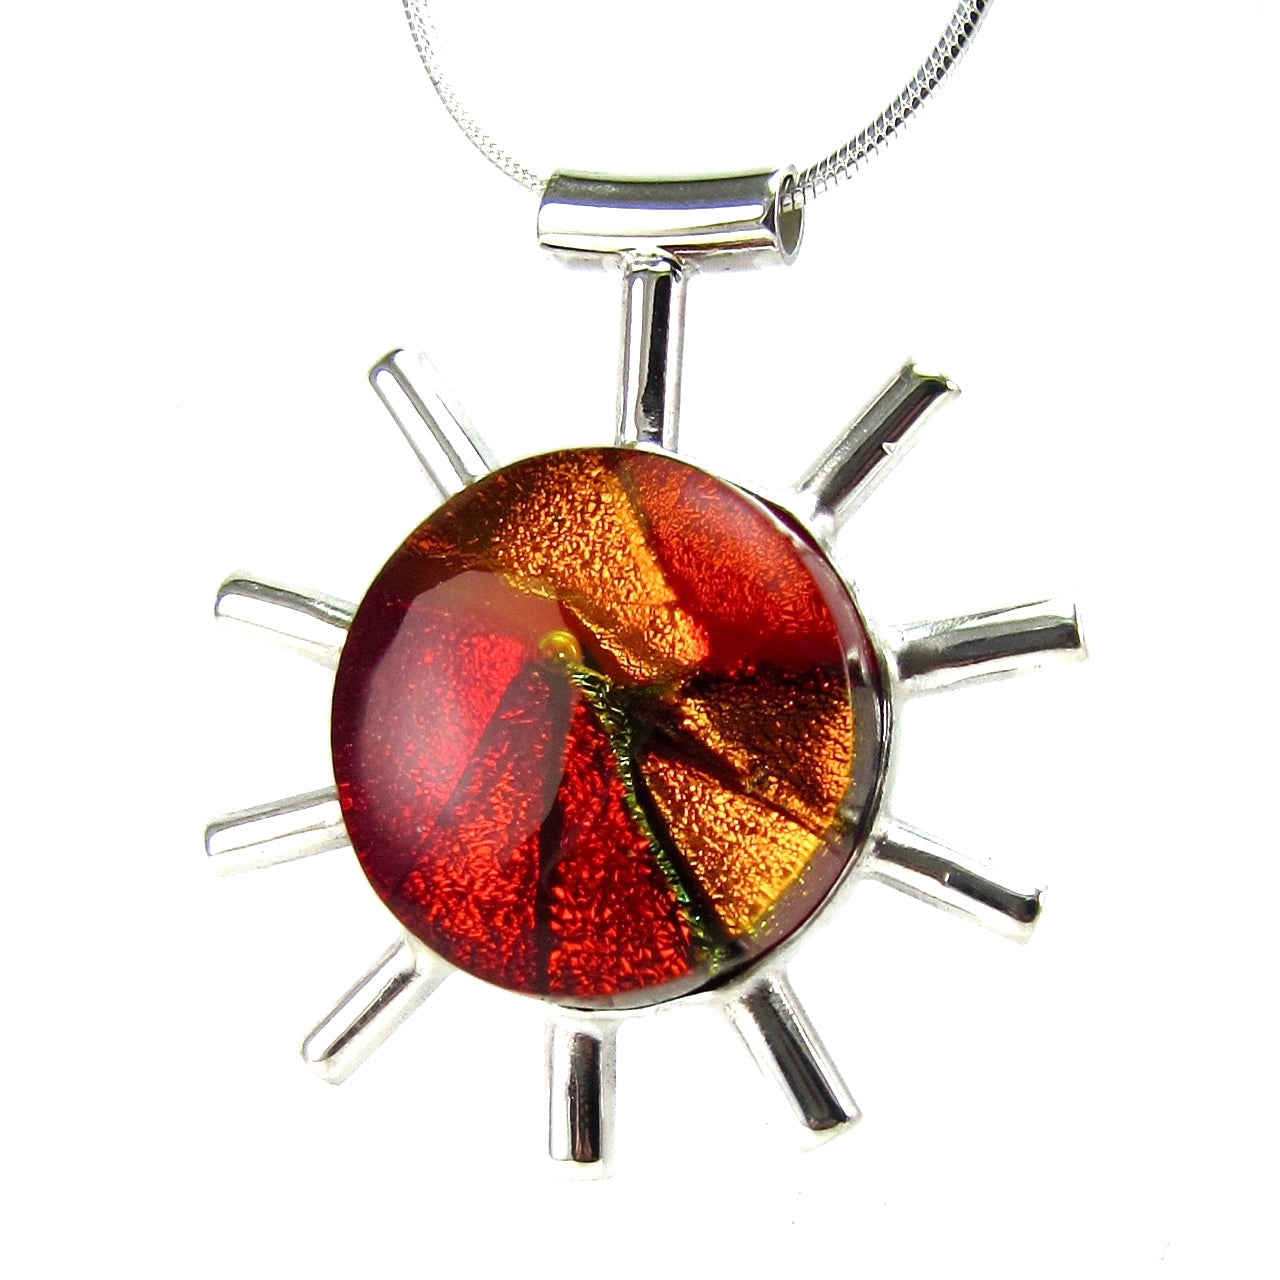 sun melange, orange, red, gold, abstract corona pendant necklace, fused glass, glass jewelry, glass and silver jewelry, handmade, handcrafted, American Craft, hand fabricated jewelry, hand fabricated jewellery, Athen, Georgia, colorful jewelry, sparkle, bullseye glass, dichroic glass, art jewelry